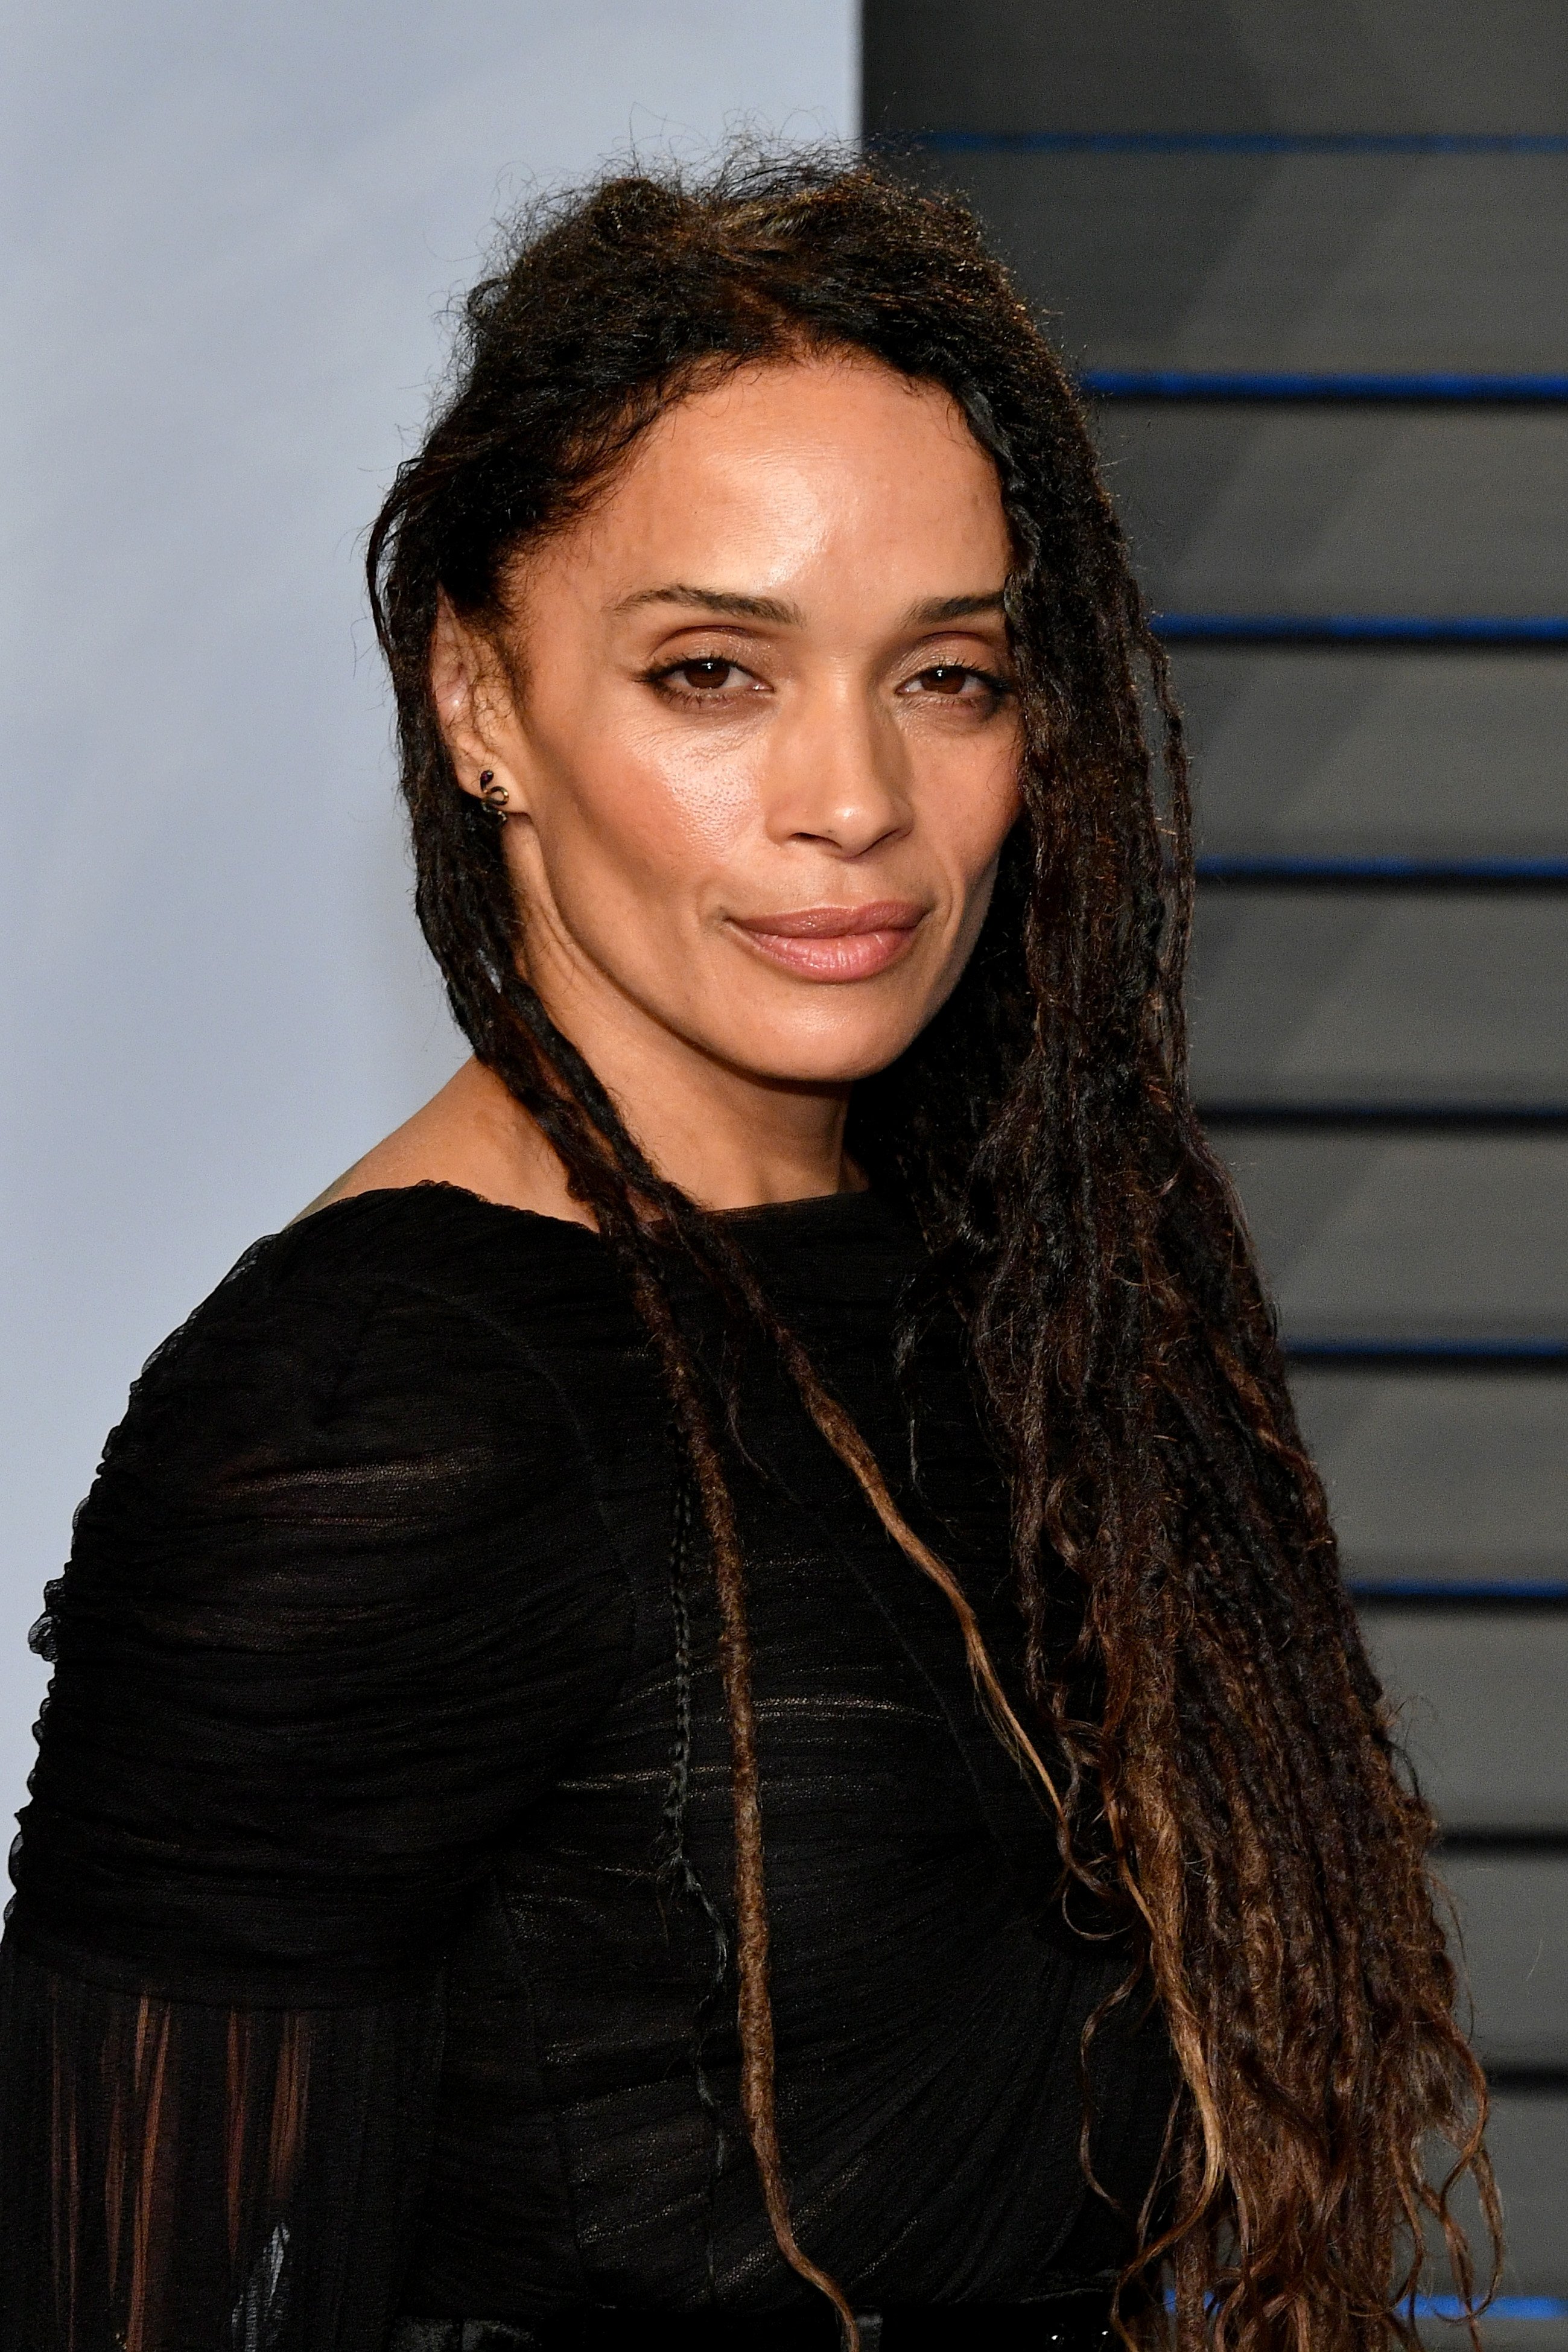 Lisa Bonet attends the 2018 Vanity Fair Oscar Party hosted by Radhika Jones at Wallis Annenberg Center for the Performing Arts on March 4, 2018 | Photo: GettyImages